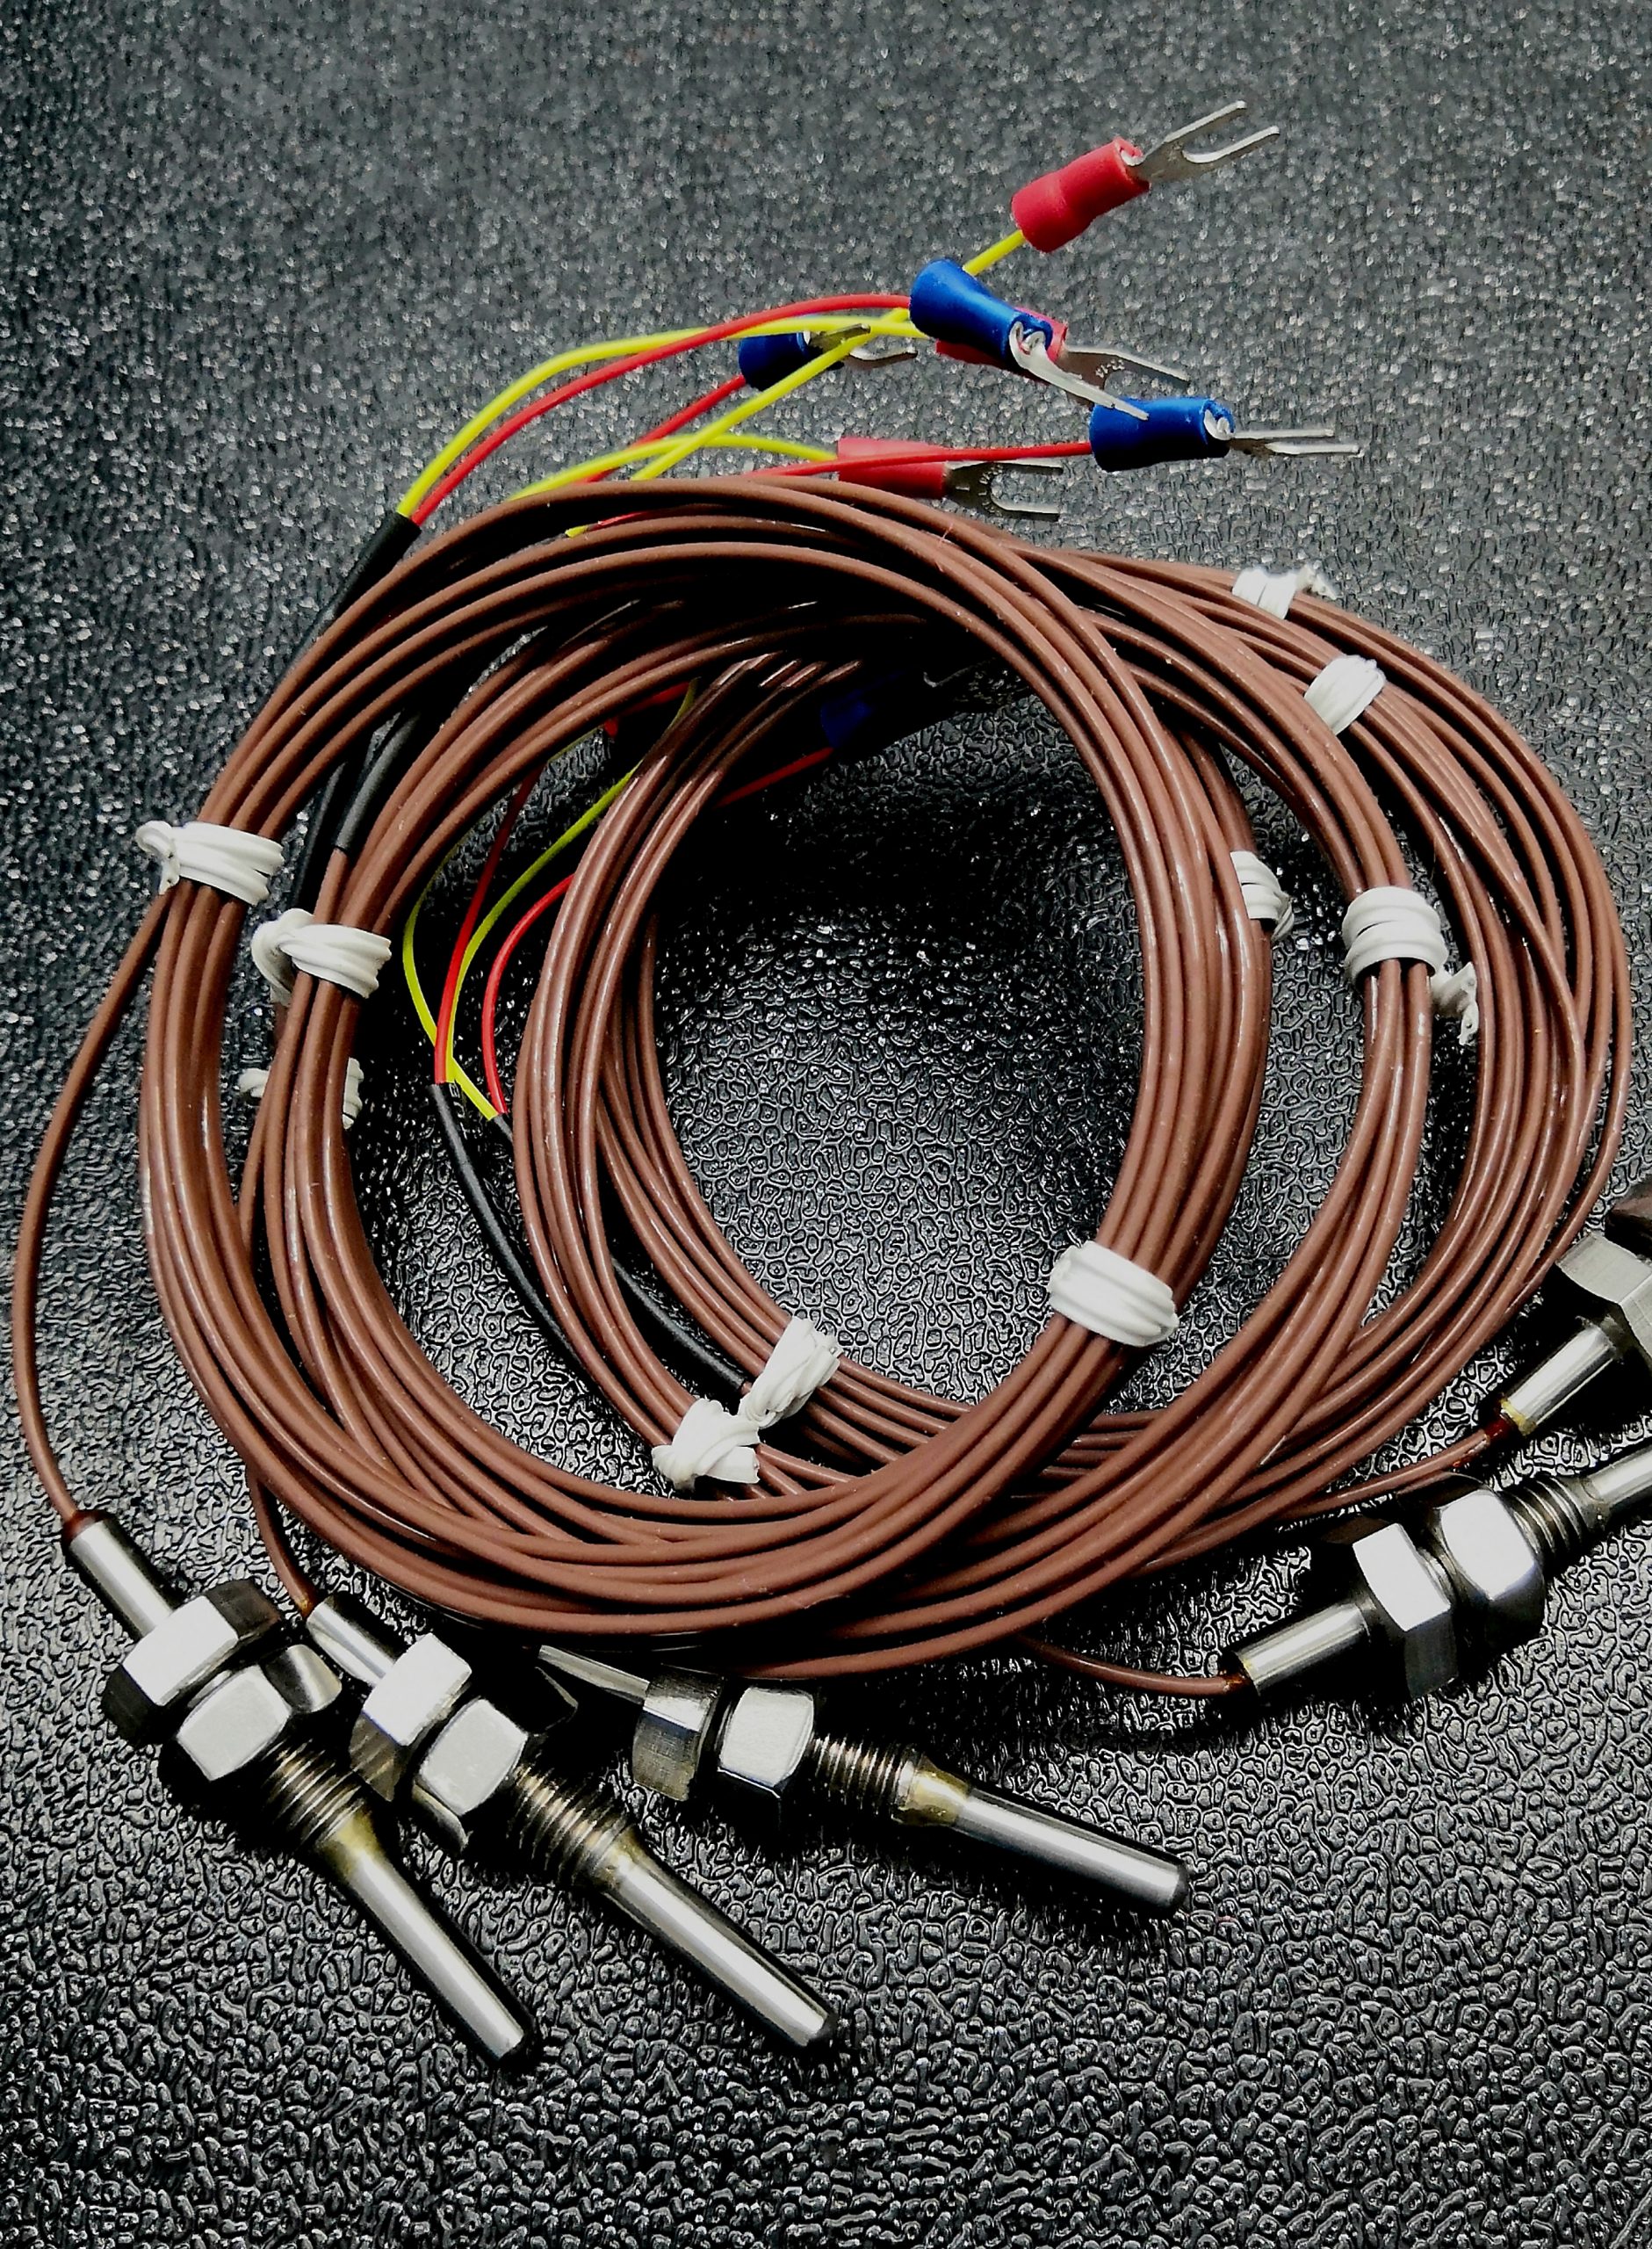 What is a thermocouple? How do they work?